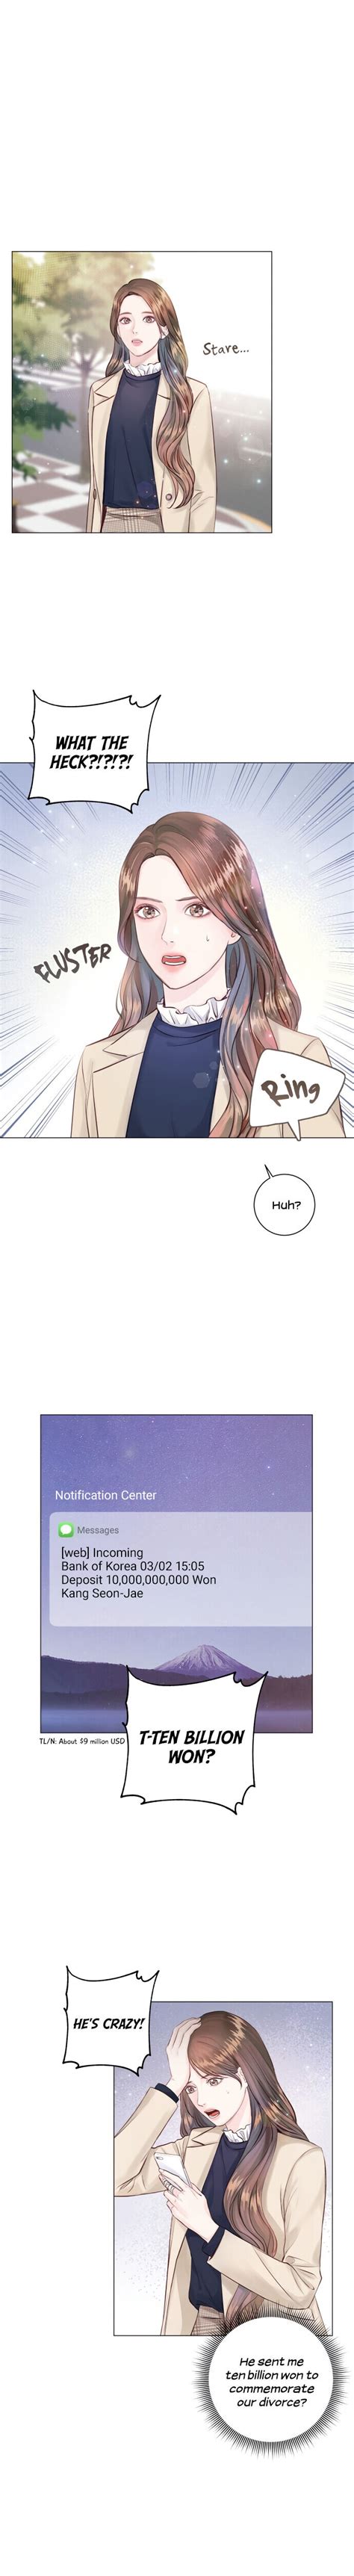 From some point on, the memory became a hope. Surely a Happy Ending - Chapter 3 - 1ST KISS MANGA